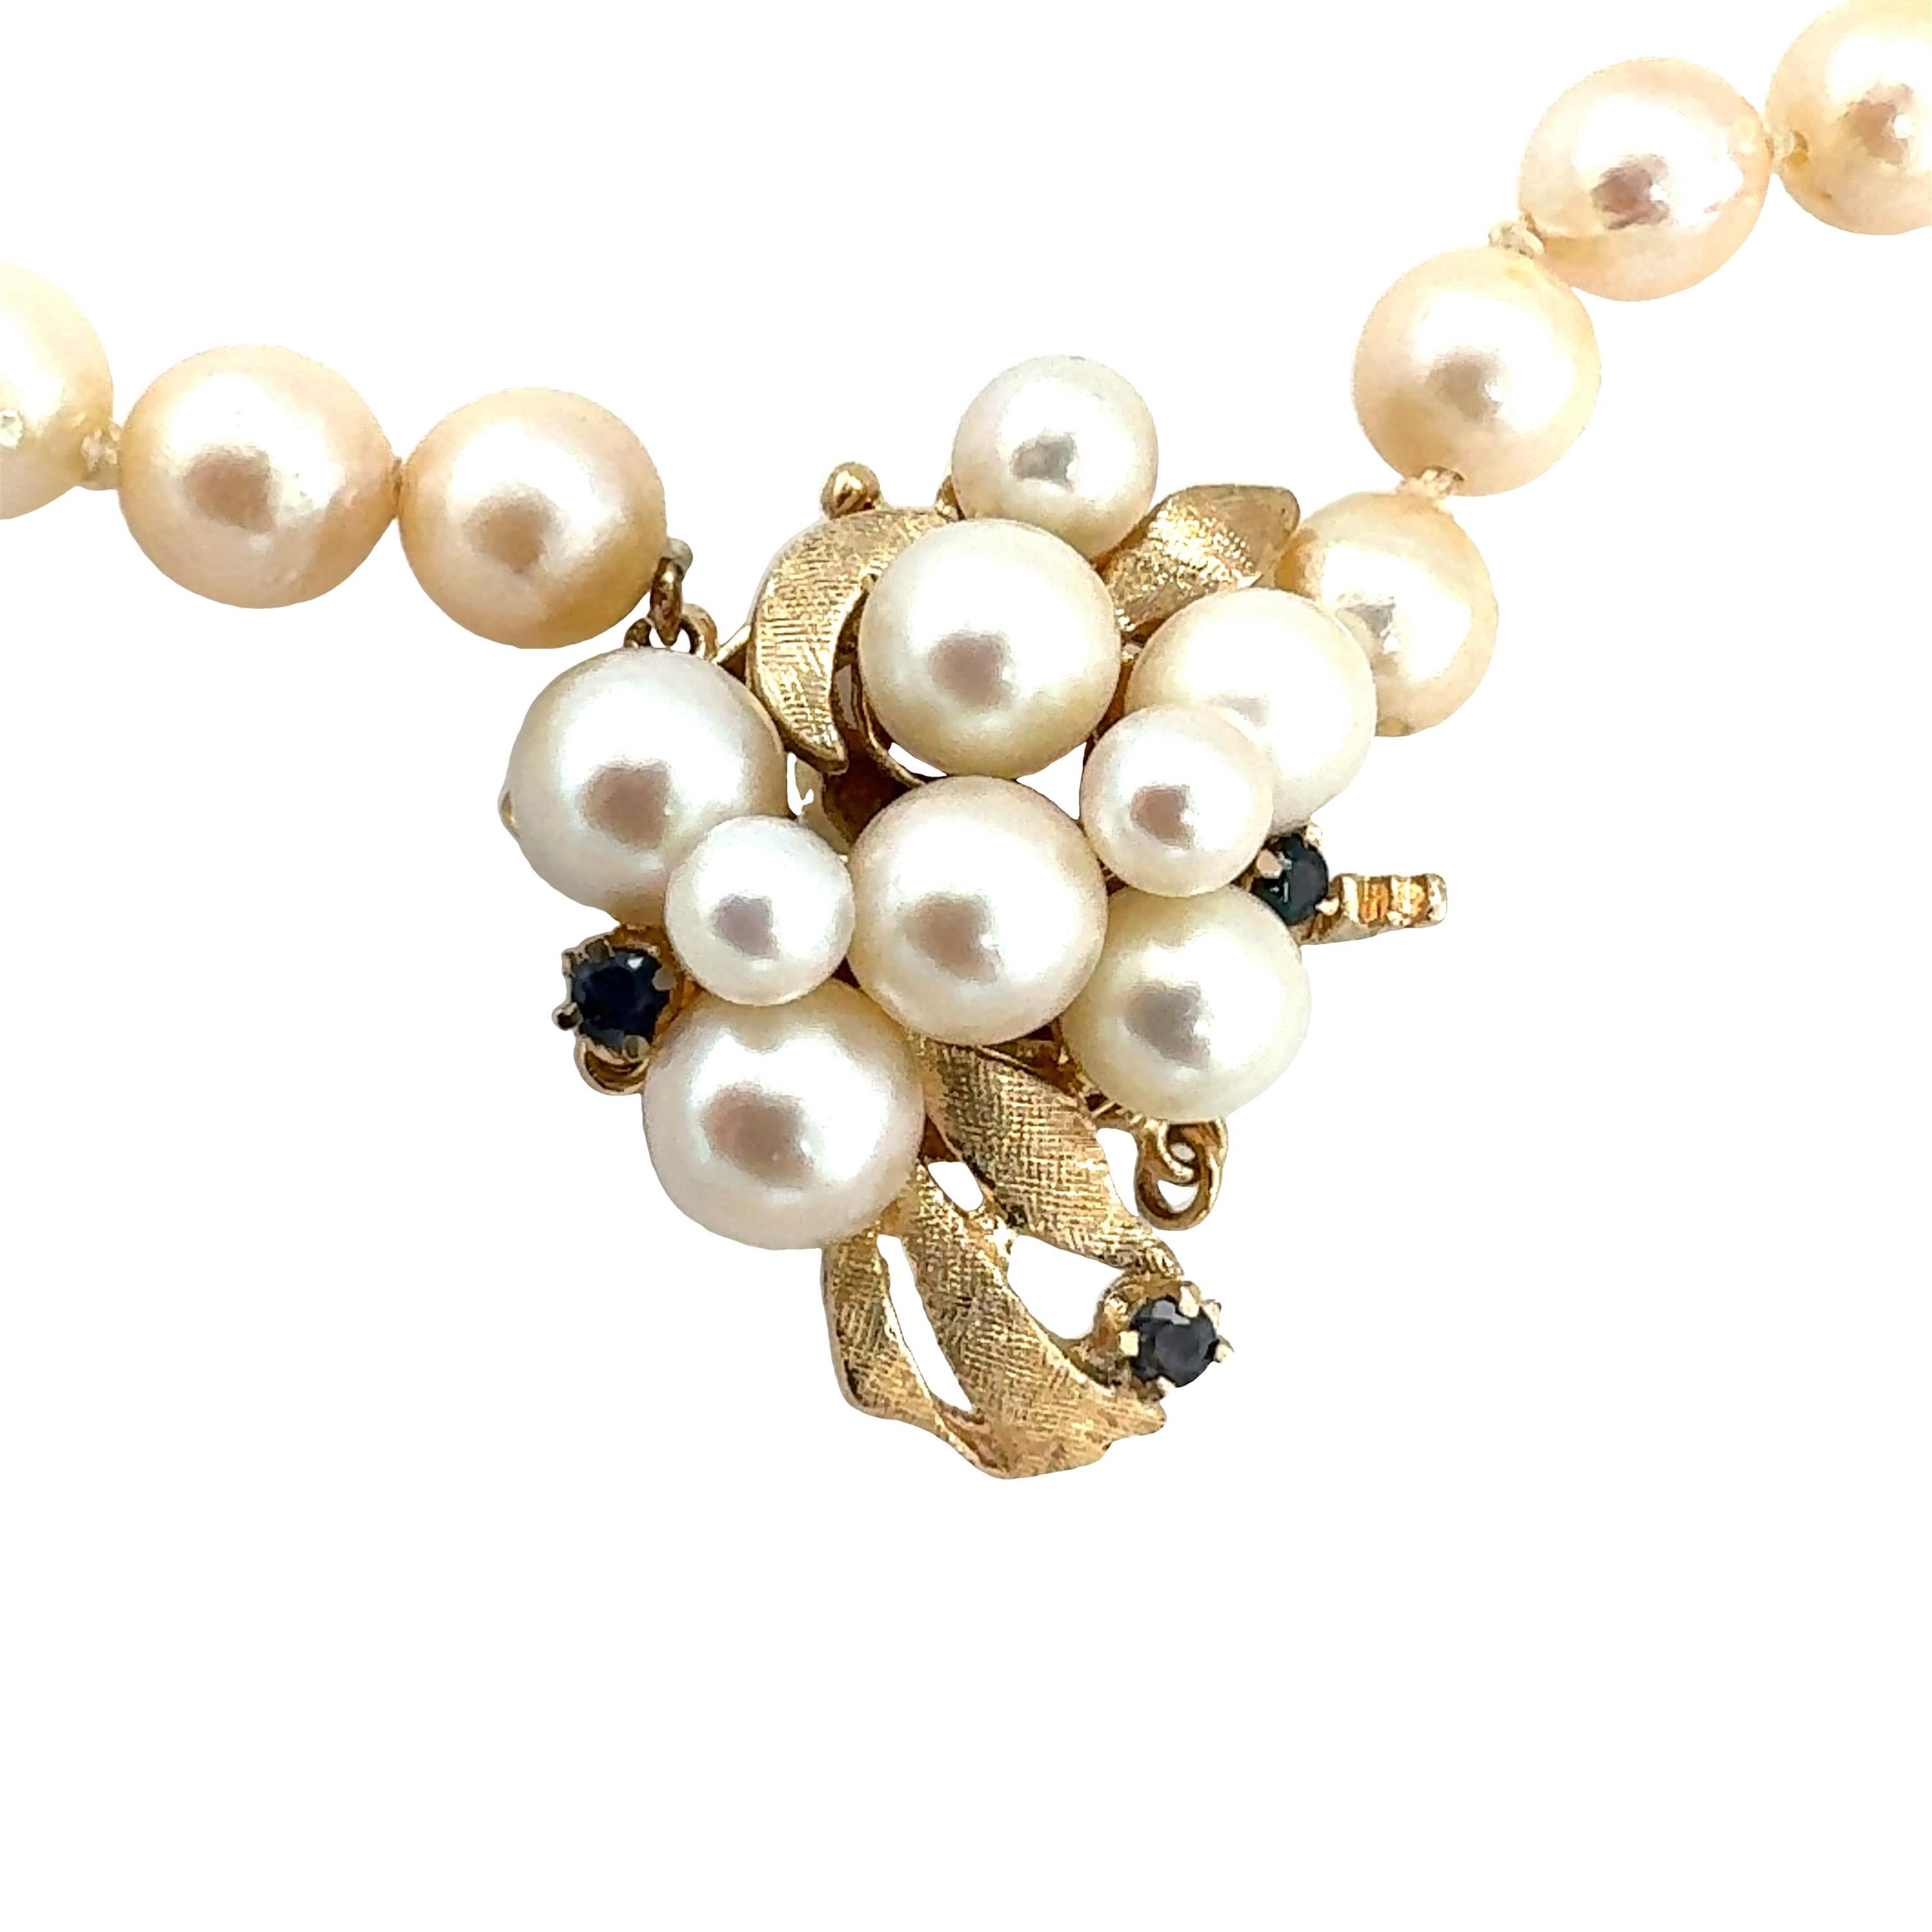 One pearl strand necklace with 48 cream color, round cultured pearls measuring 7 millimeters in diameter. With pearl and sapphire clasp with pearls measuring 4.50-6.50 millimeters in diameter and 0.12 ct. in total sapphire weight.

Gemstone: